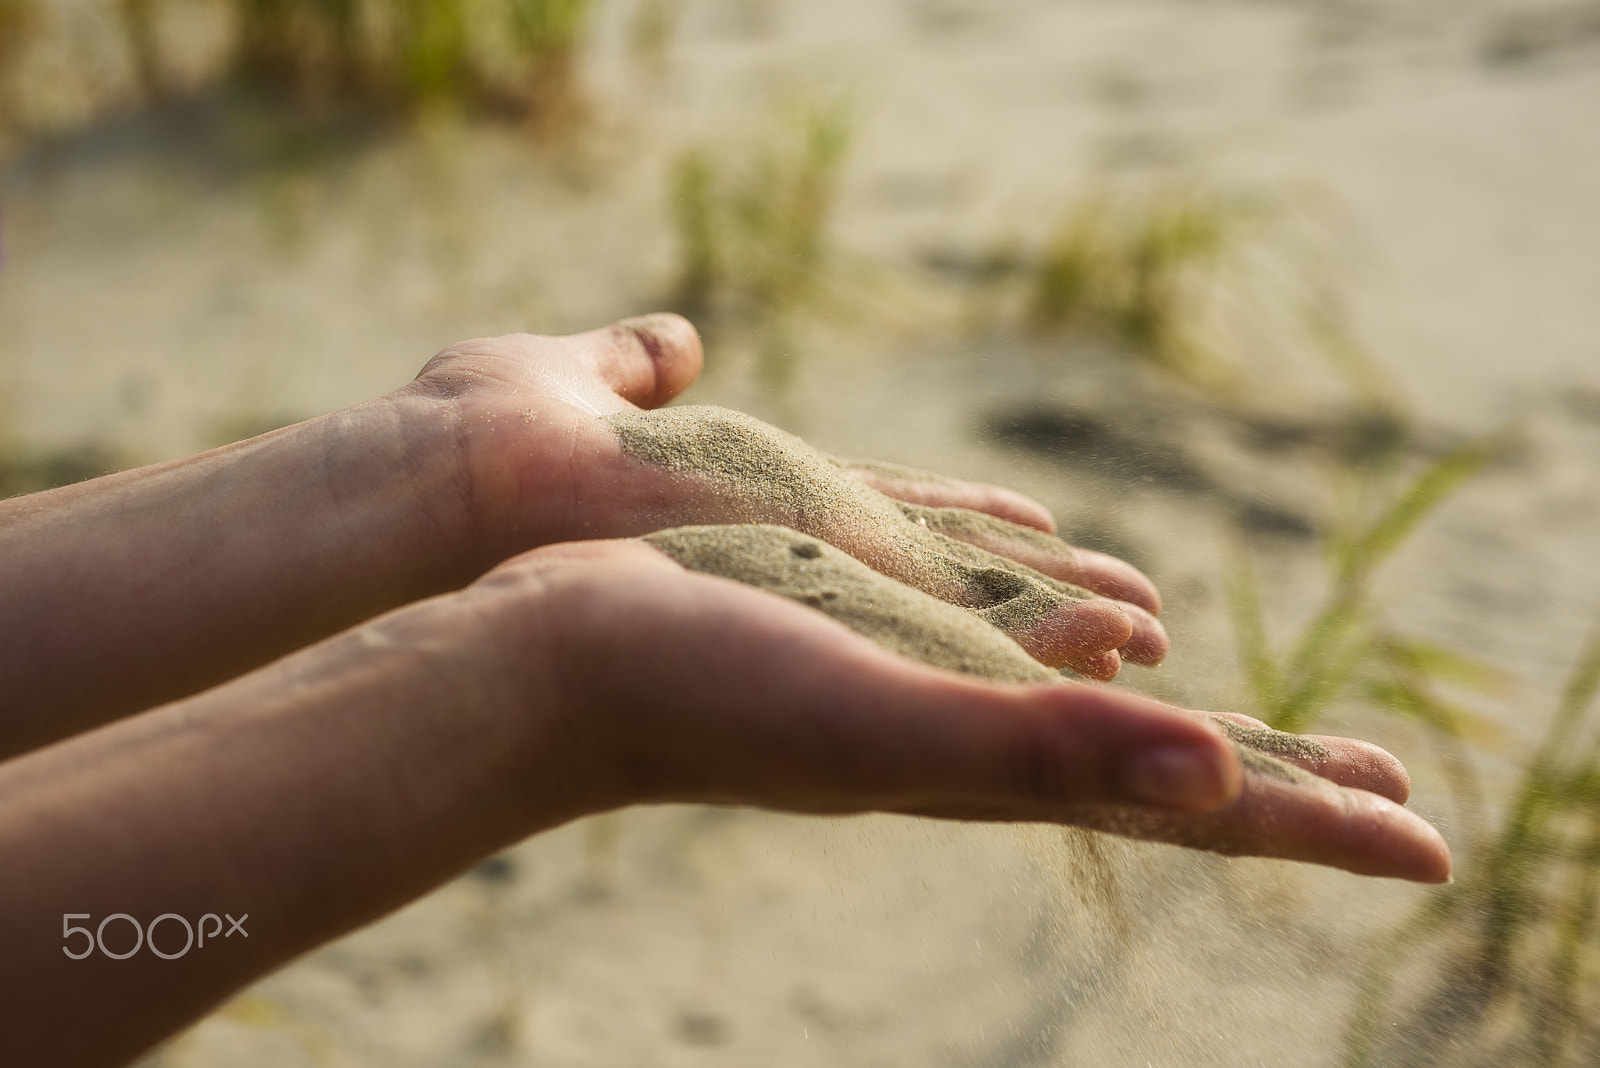 Nikon D800 sample photo. Pink bermuda sand close up in the hands of a young photography